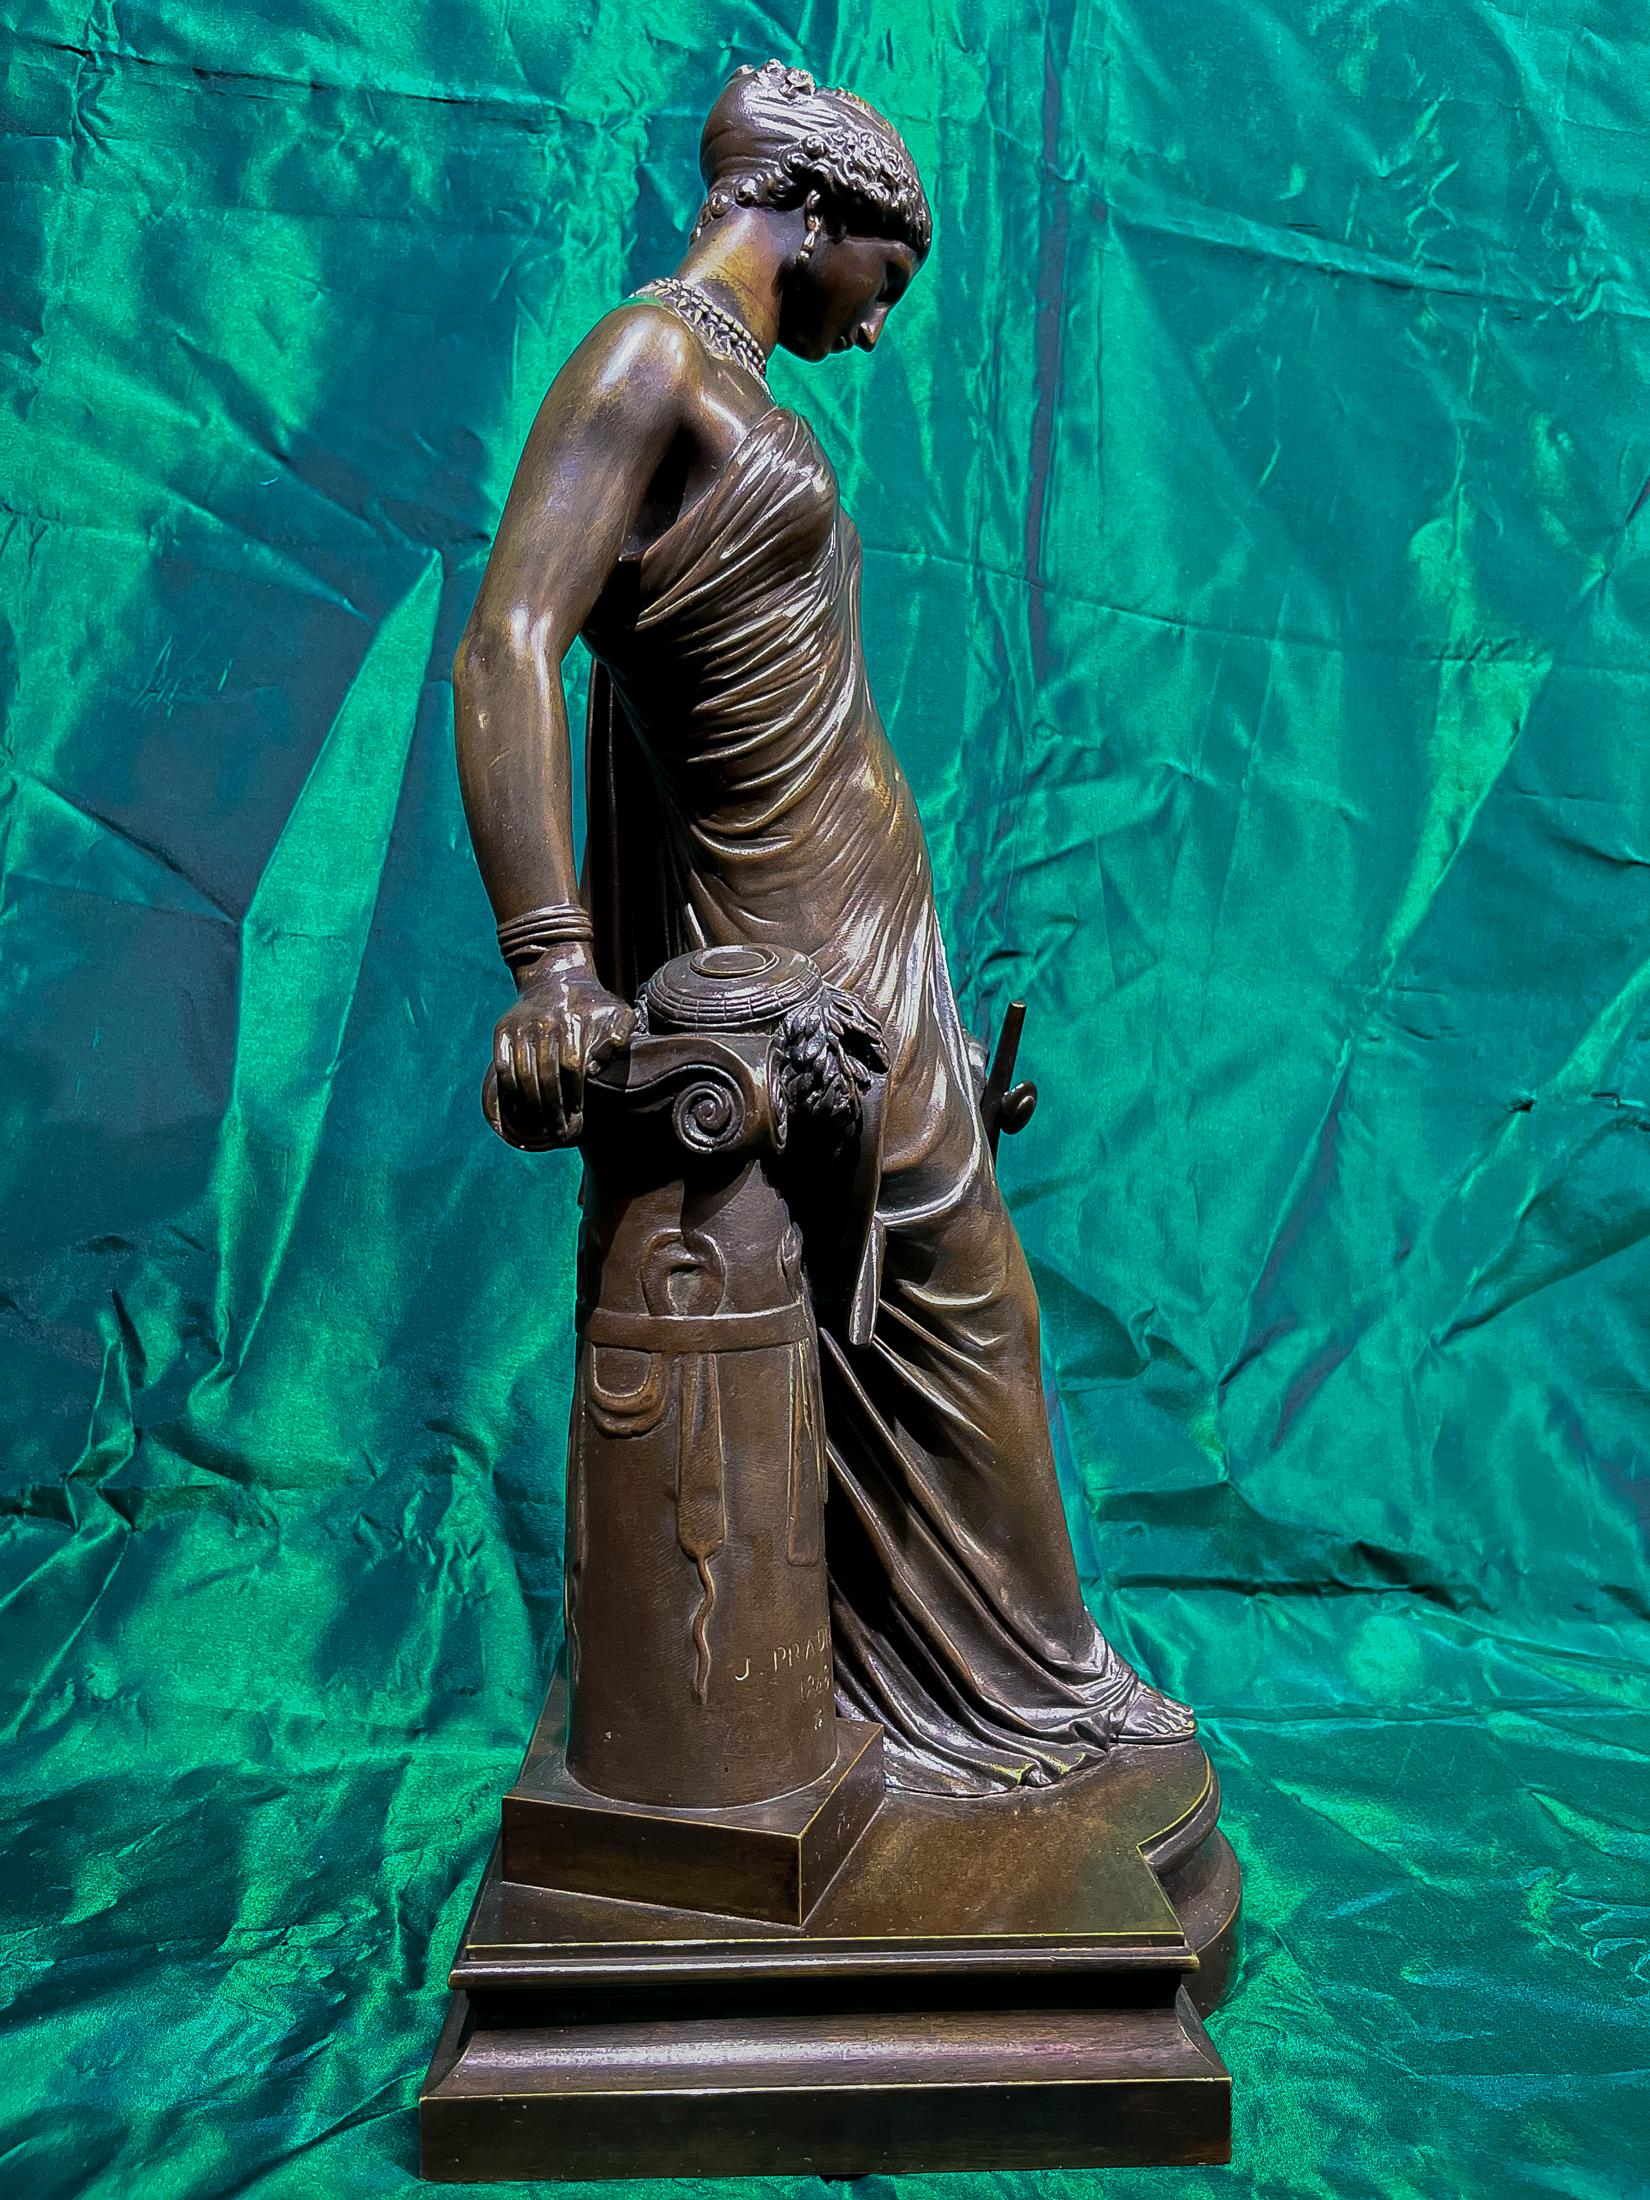 Sappho Leaning Against a Column Holding Her Lyre by Pradier in French Bronze - Gold Figurative Sculpture by James Pradier 